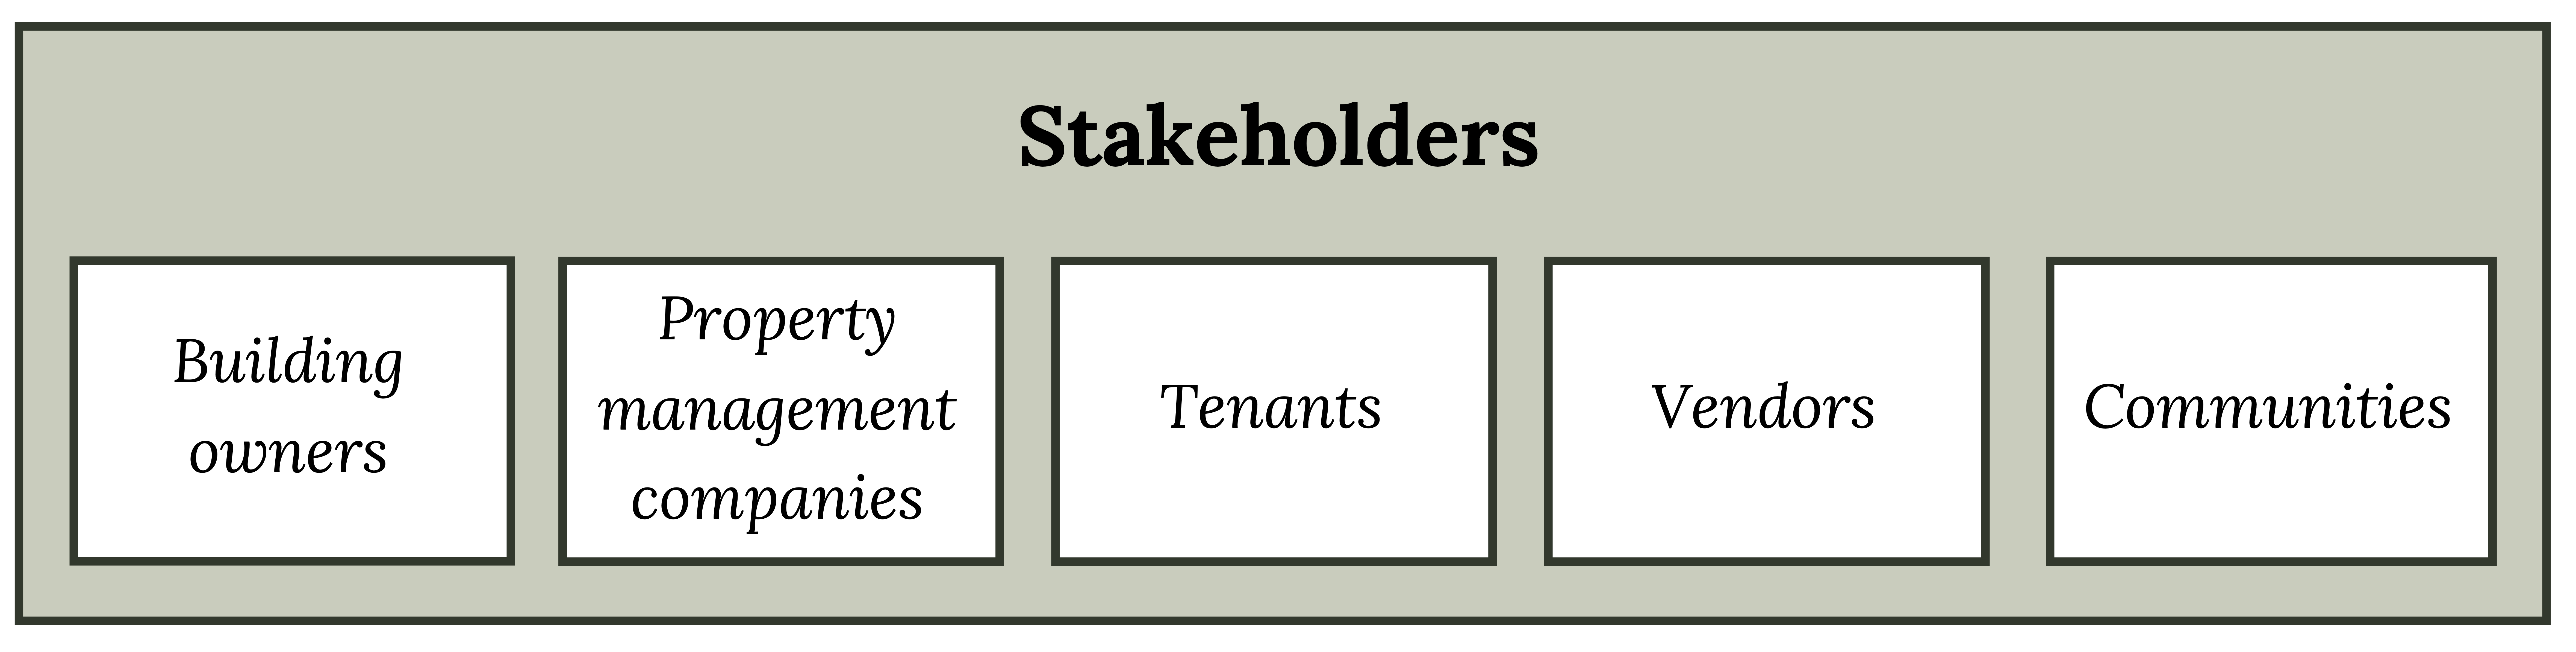 Stakeholders: building owners, property management companies, tenants, vendors, communities.